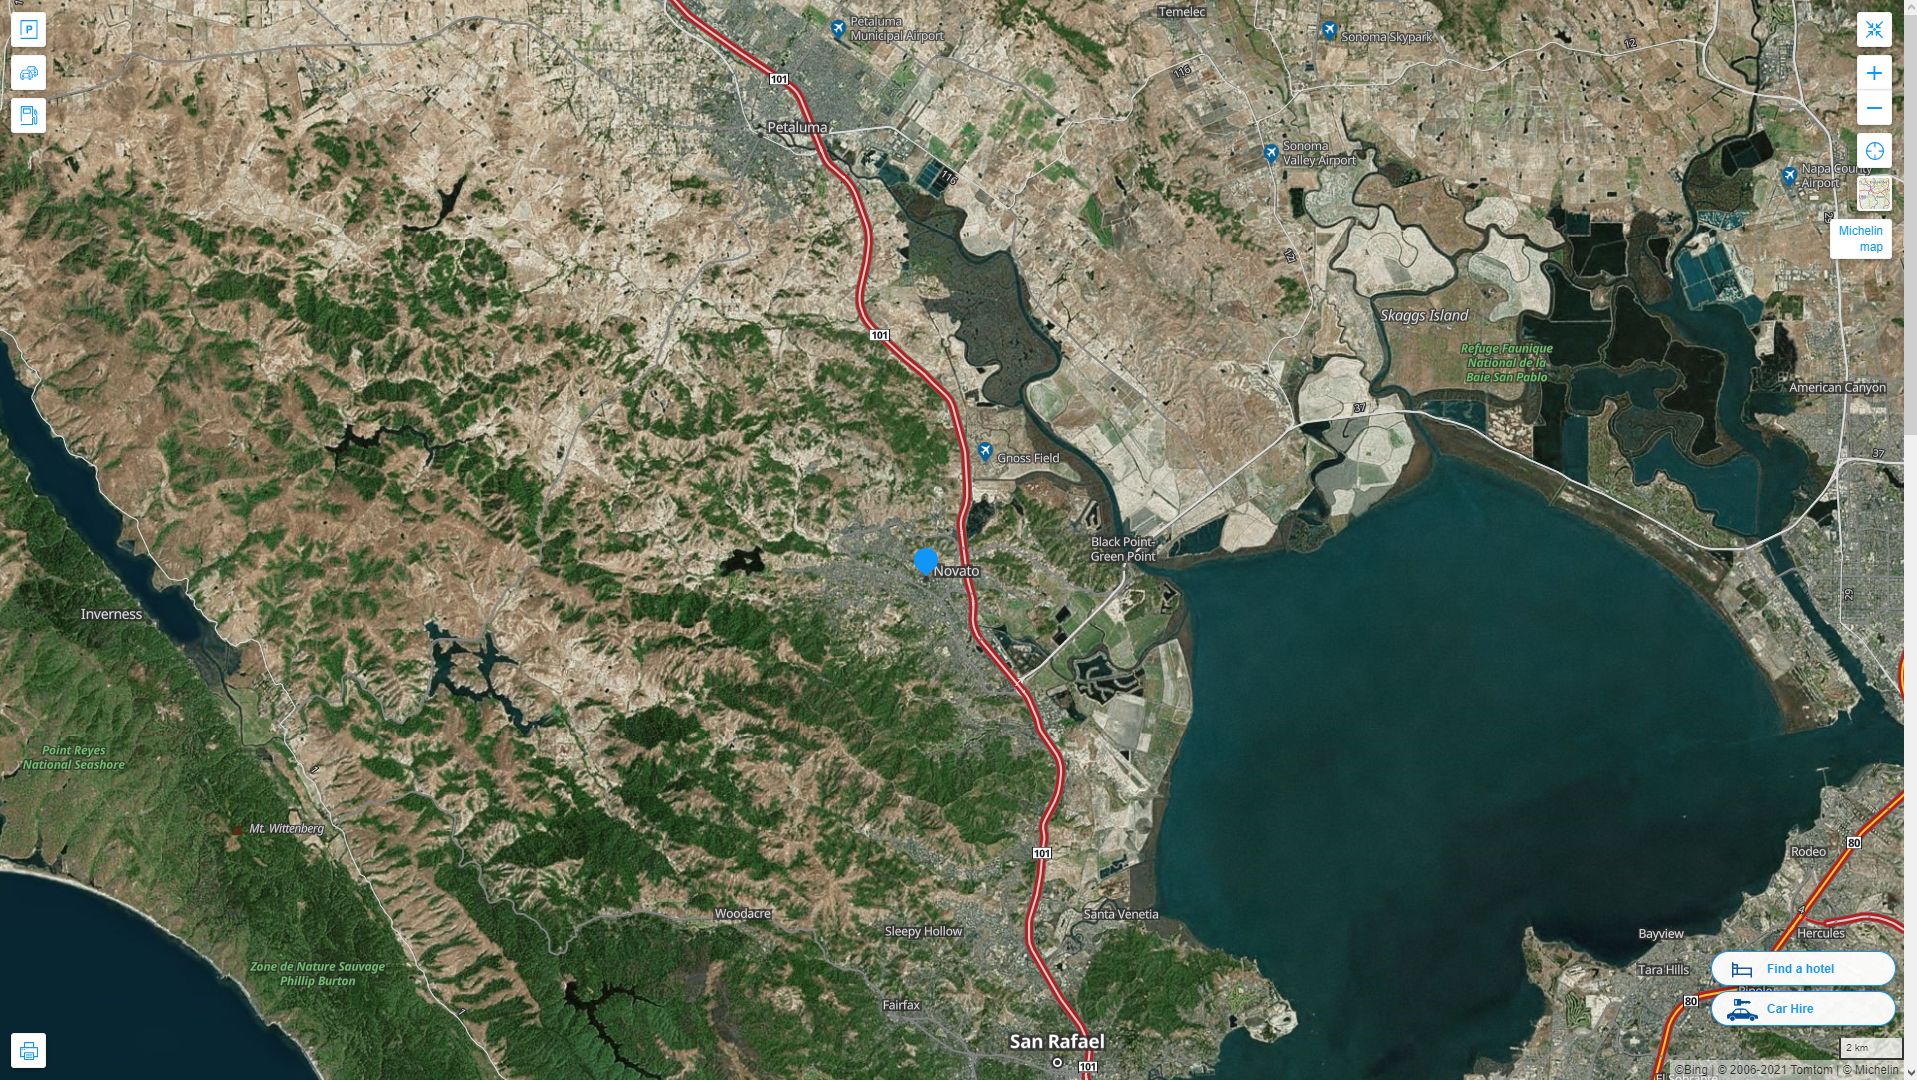 Novato California Highway and Road Map with Satellite View